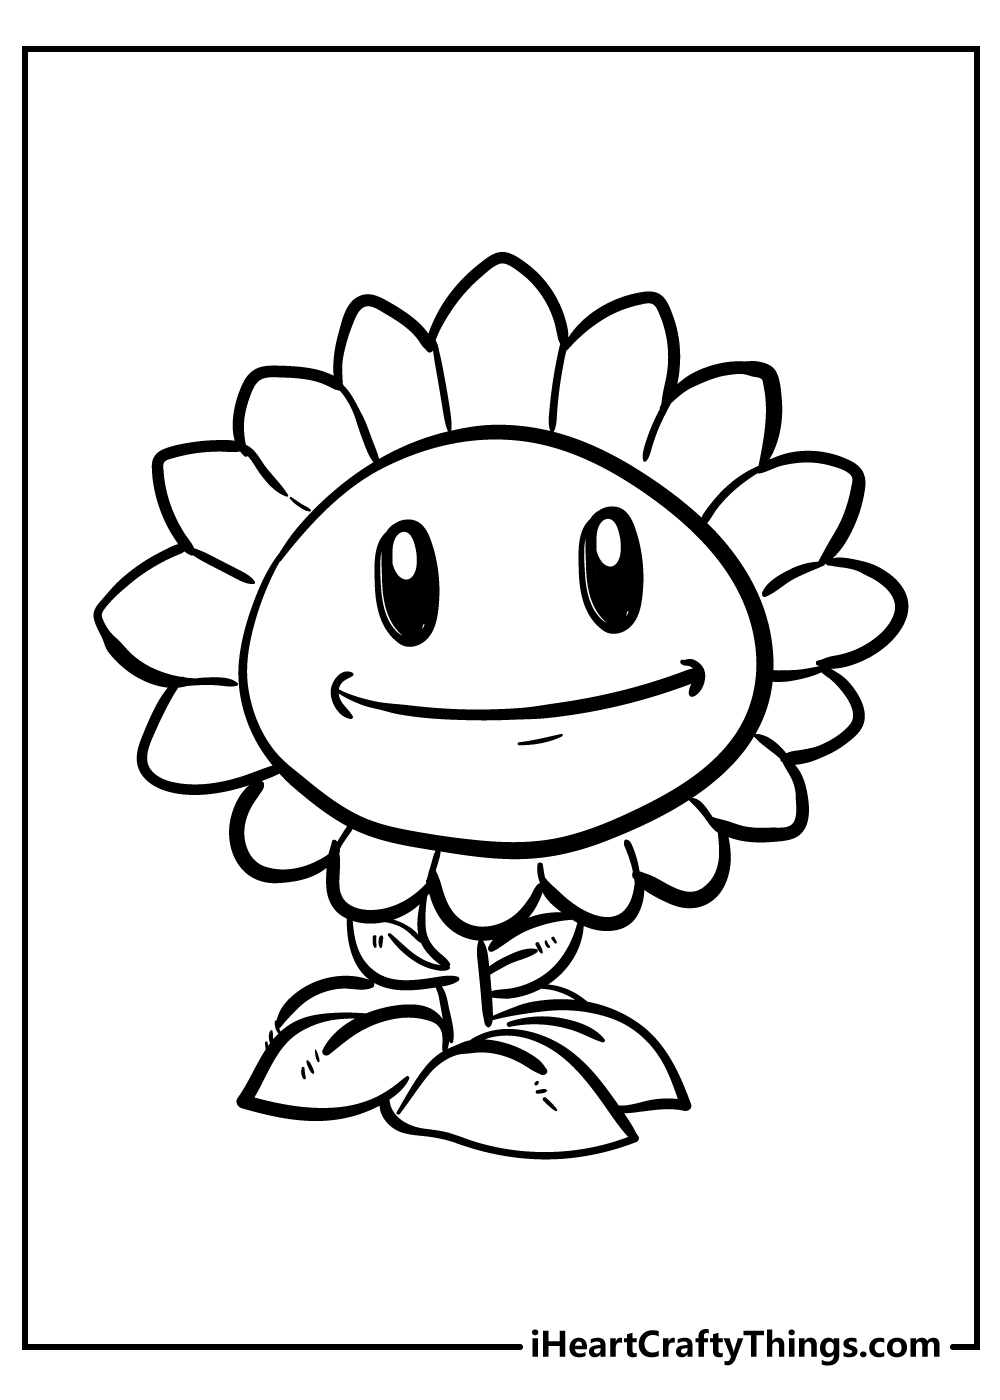 Plants Vs. Zombies Coloring Pages for preschoolers free printable